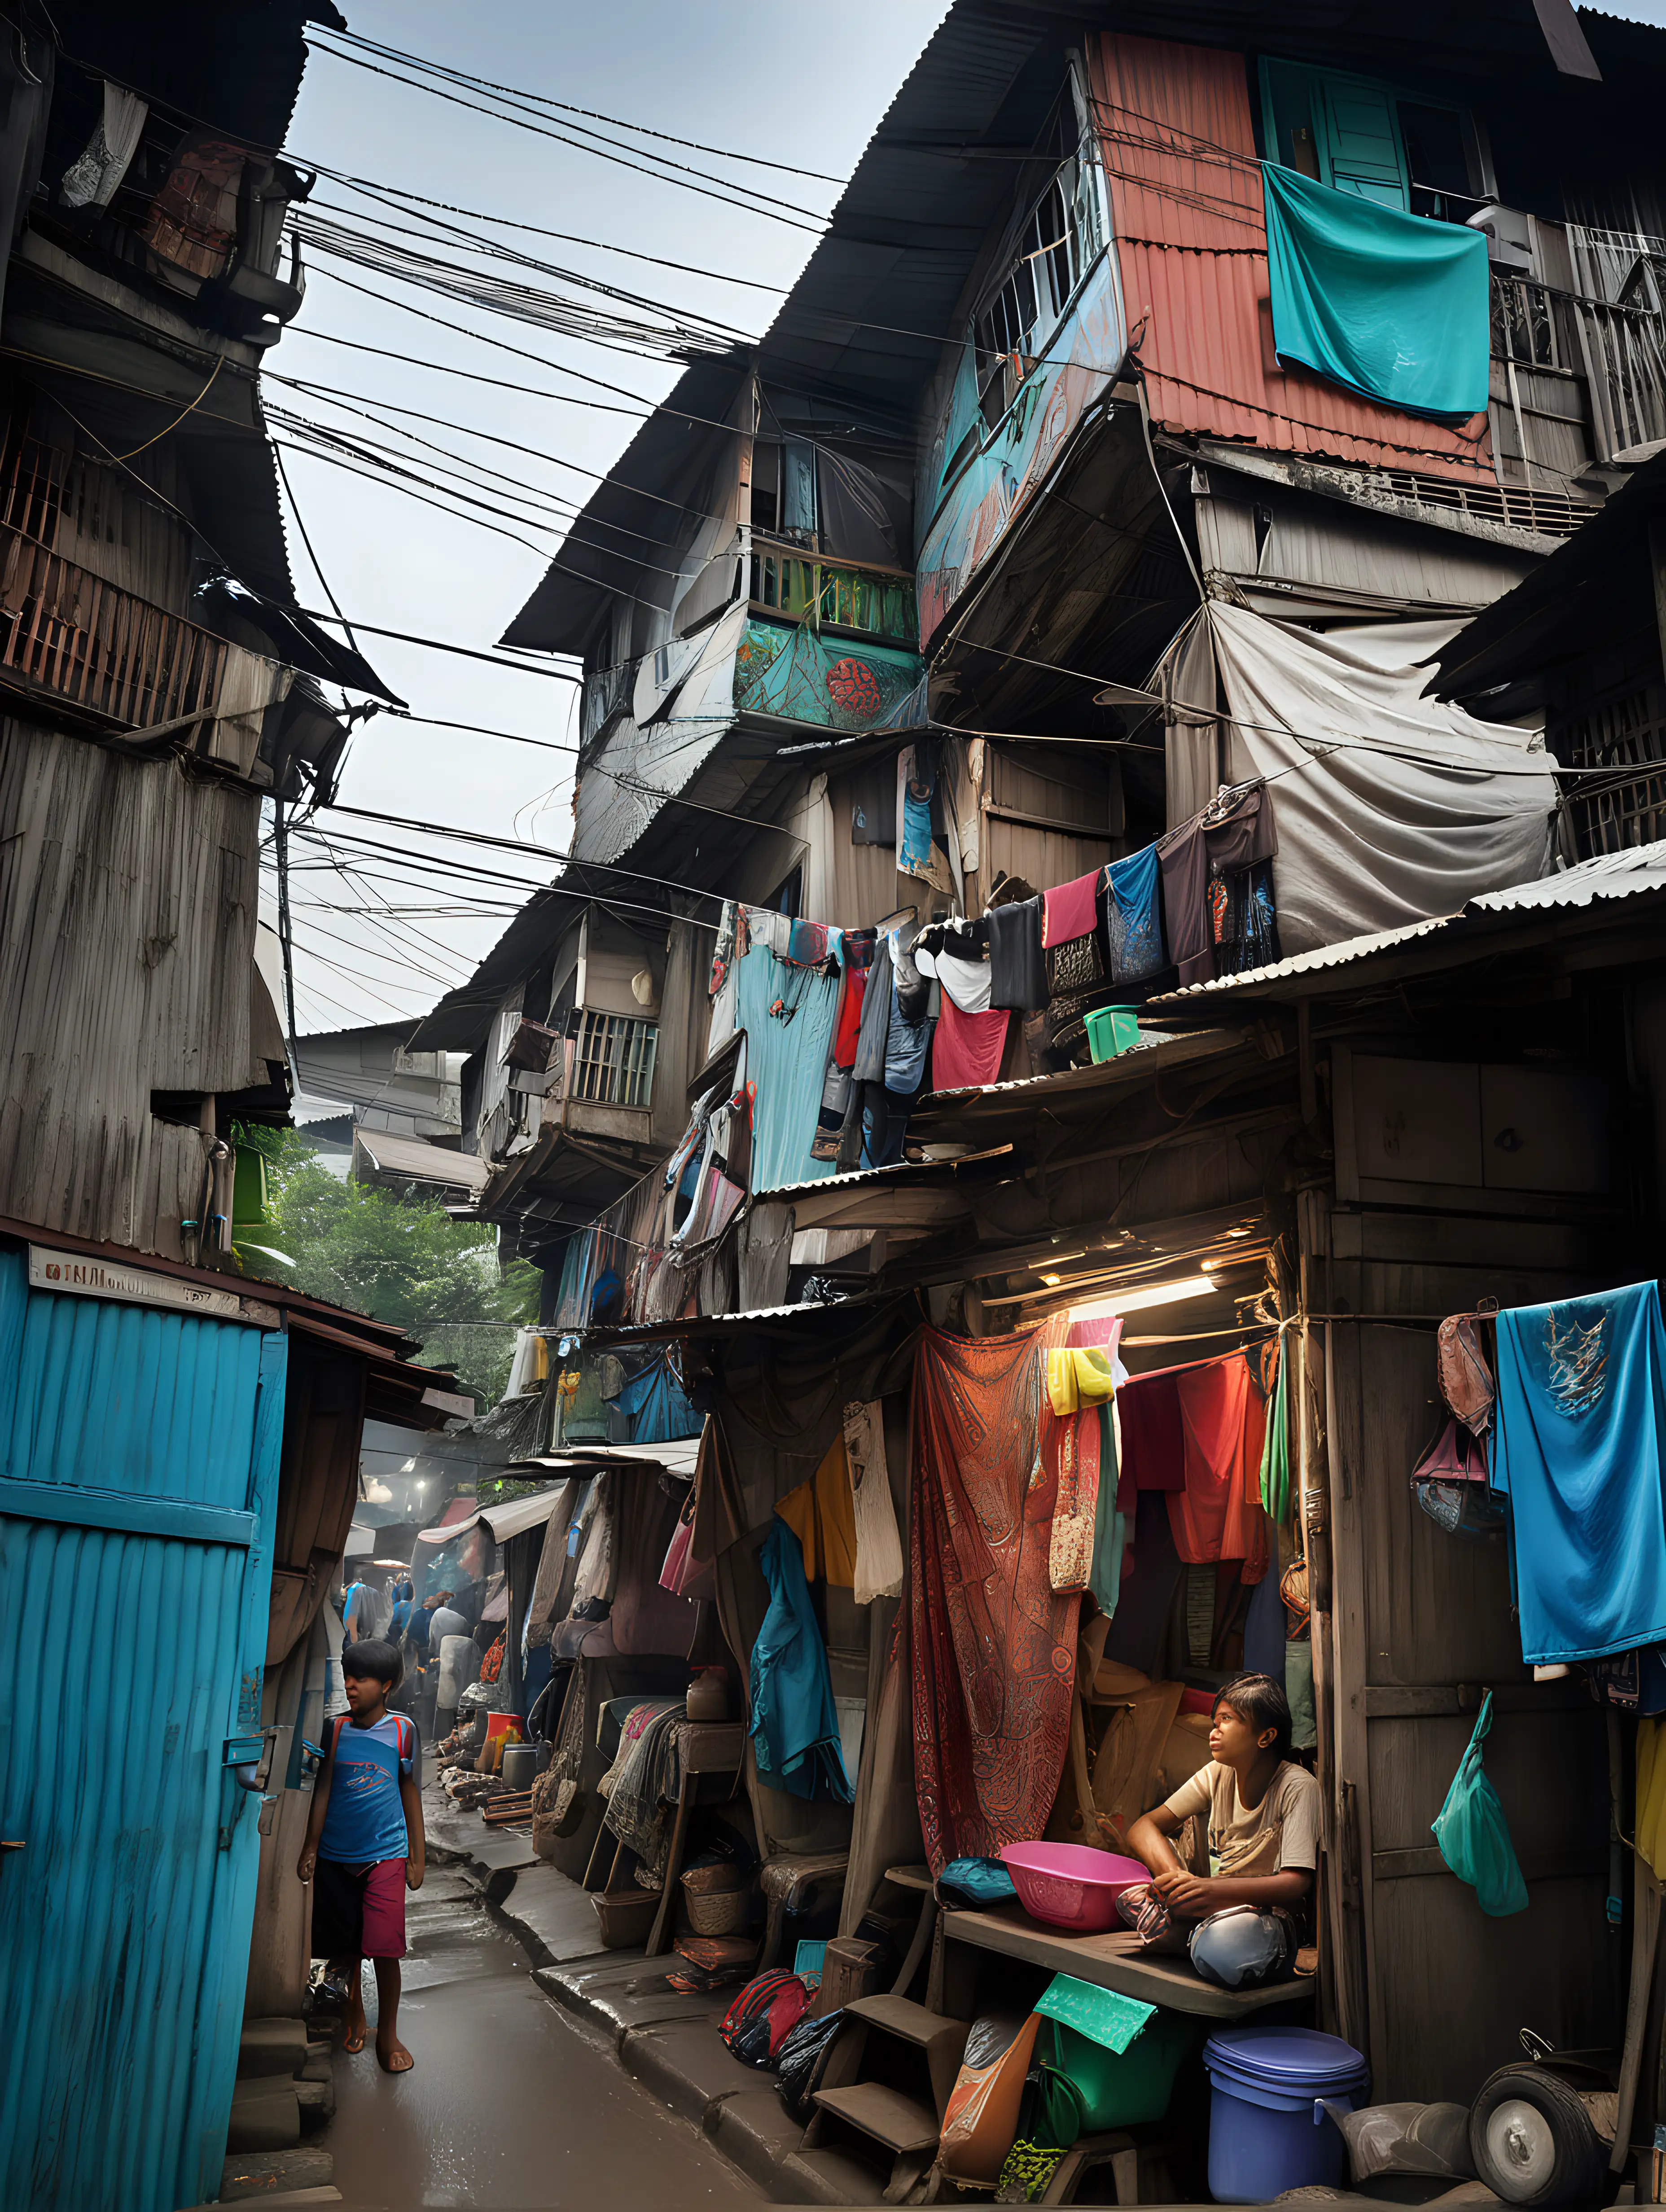 (cinematic lighting), In the bustling urban fabric of Jakarta, Indonesia, a slum squatter house emerges as a poignant testament to the complexities of city life. Narrow alleyways wind through a labyrinth of makeshift dwellings, constructed from salvaged materials. The structures, cramped yet resilient, lean against one another, forming a patchwork of humble abodes.

Colorful laundry hangs between the closely packed houses, adding a vivid contrast to the weathered facades. Wires crisscross above, creating an intricate network of makeshift connections. The scent of street food and the sounds of everyday life permeate the air, creating an atmosphere that is both vibrant and challenging.

Amidst the limited resources, the spirit of community prevails. Despite the challenging living conditions, the inhabitants find ways to bring a sense of vibrancy to their surroundings. The slum squatter house in Jakarta becomes a reflection of the resilient spirit of those who call it home, navigating life in the heart of this bustling Indonesian metropolis, intricate details, hyper realistic photography --v 5, unreal engine 